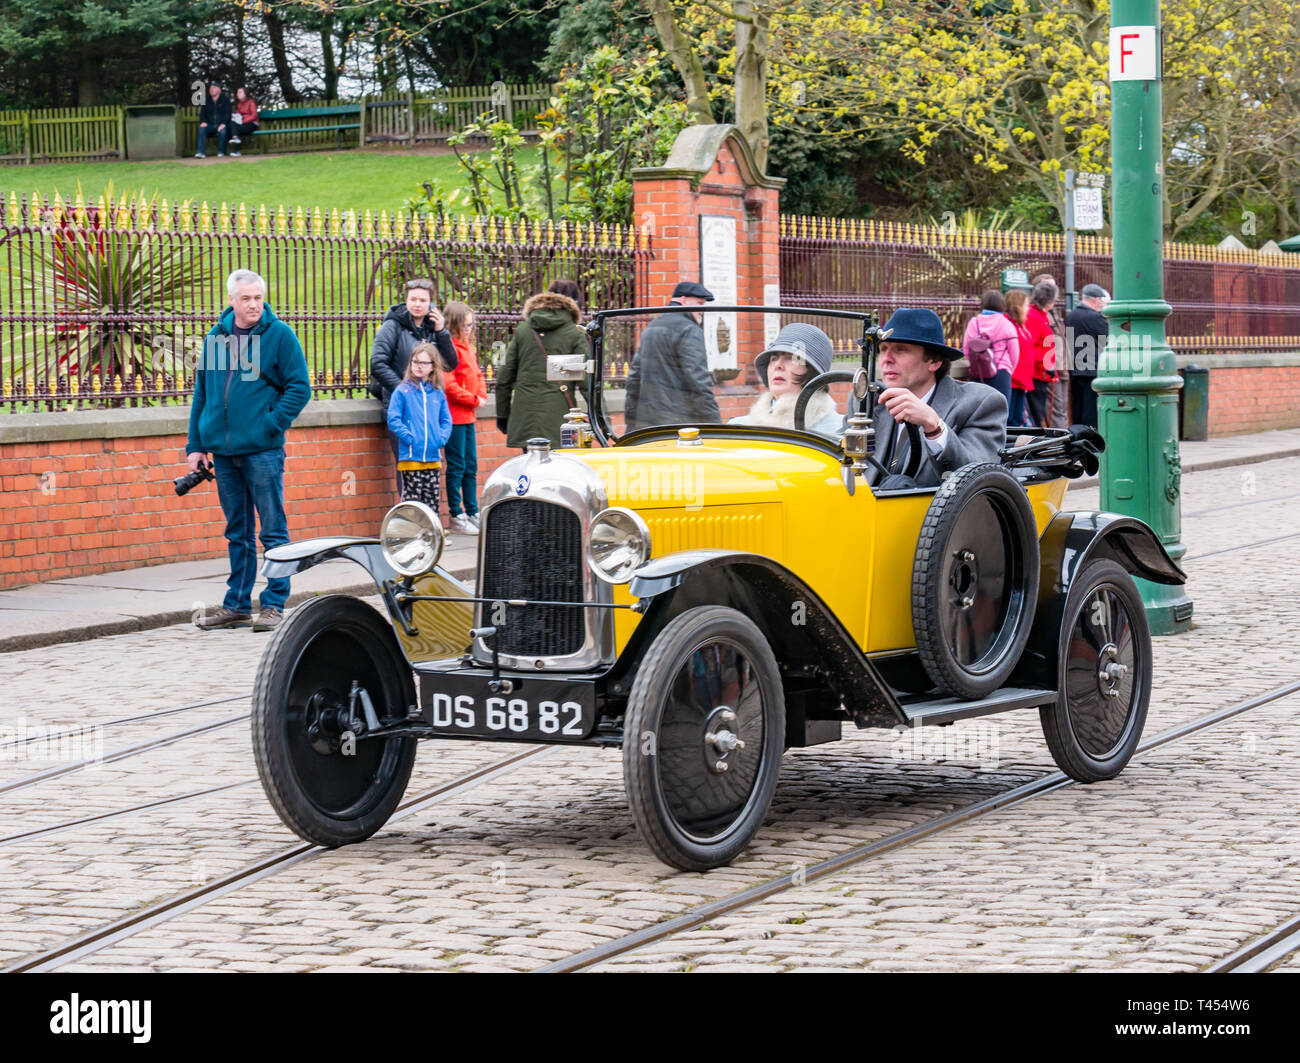 Beamish, Durham County, England, United Kingdom, 13 April 2019. Beamish Steam Day: People dressed in vintage costumes driving a vintage 1922 yellow open top Citroen car on display at Beamish Living Museum Stock Photo